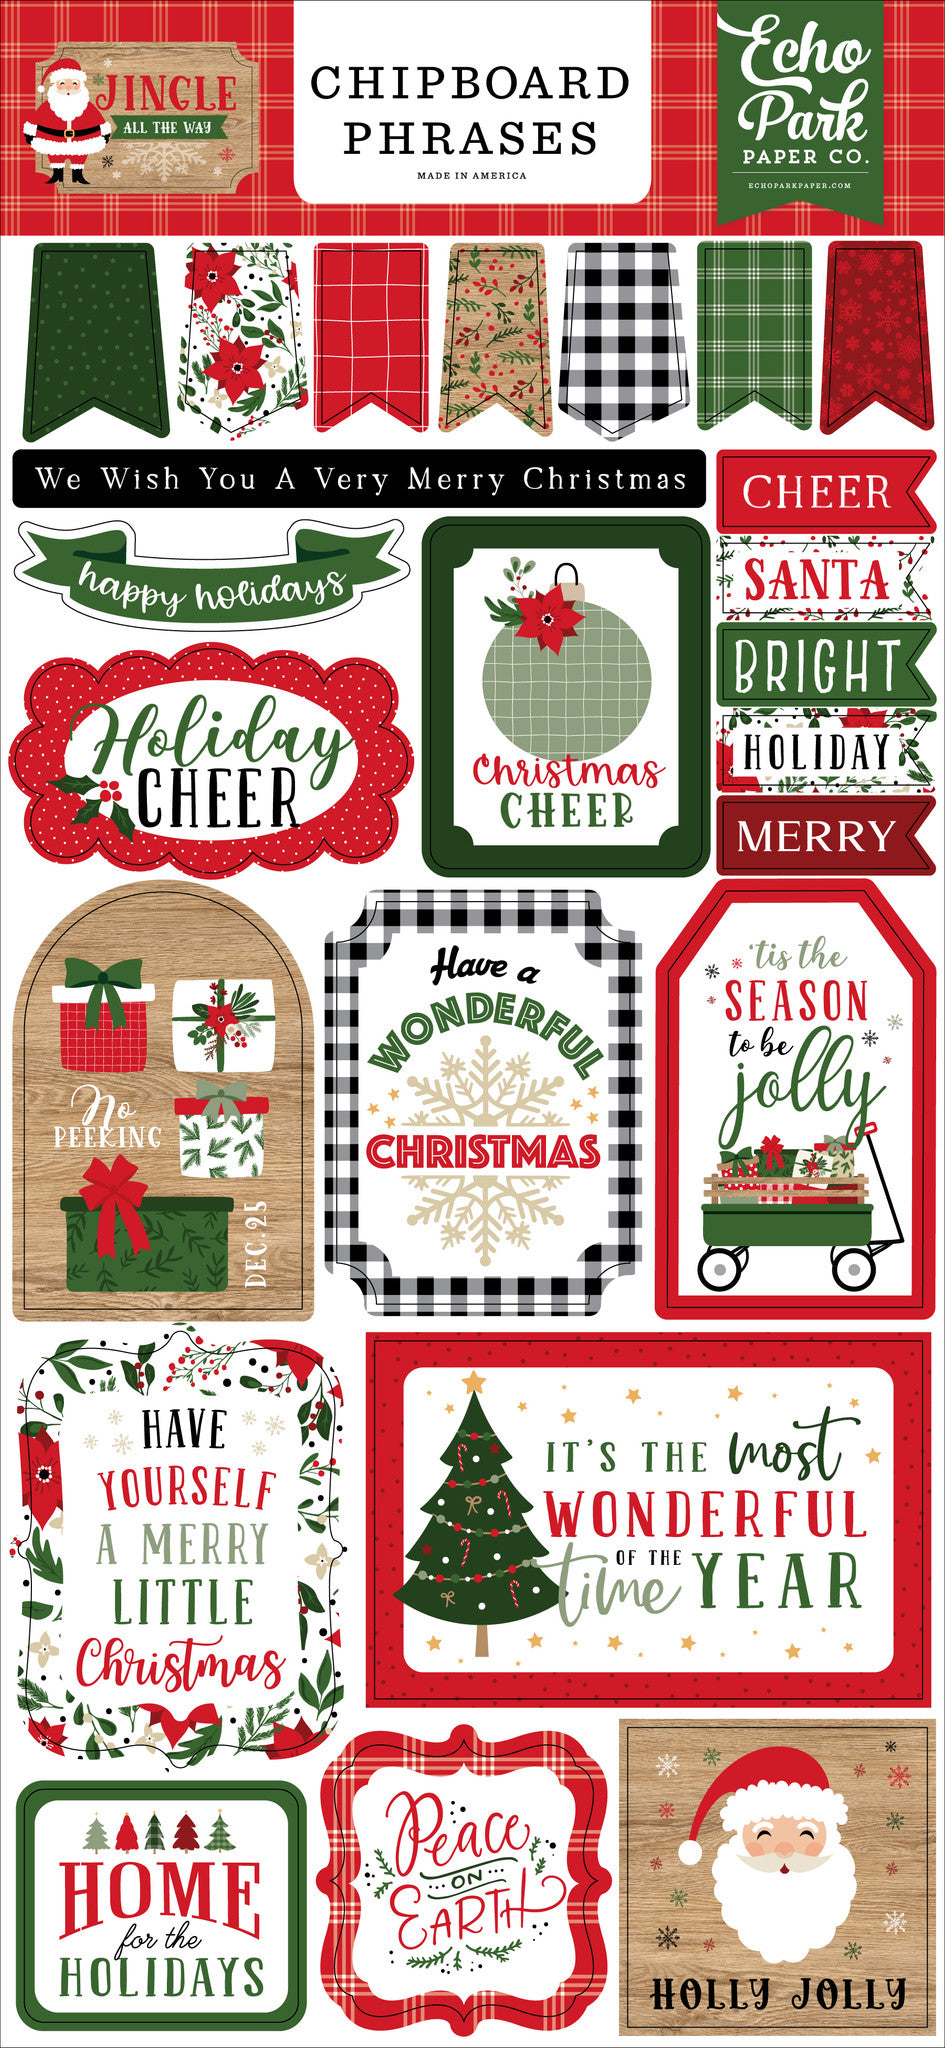 IMPERFECT "Jingle All the Way" Chipboard Phrases